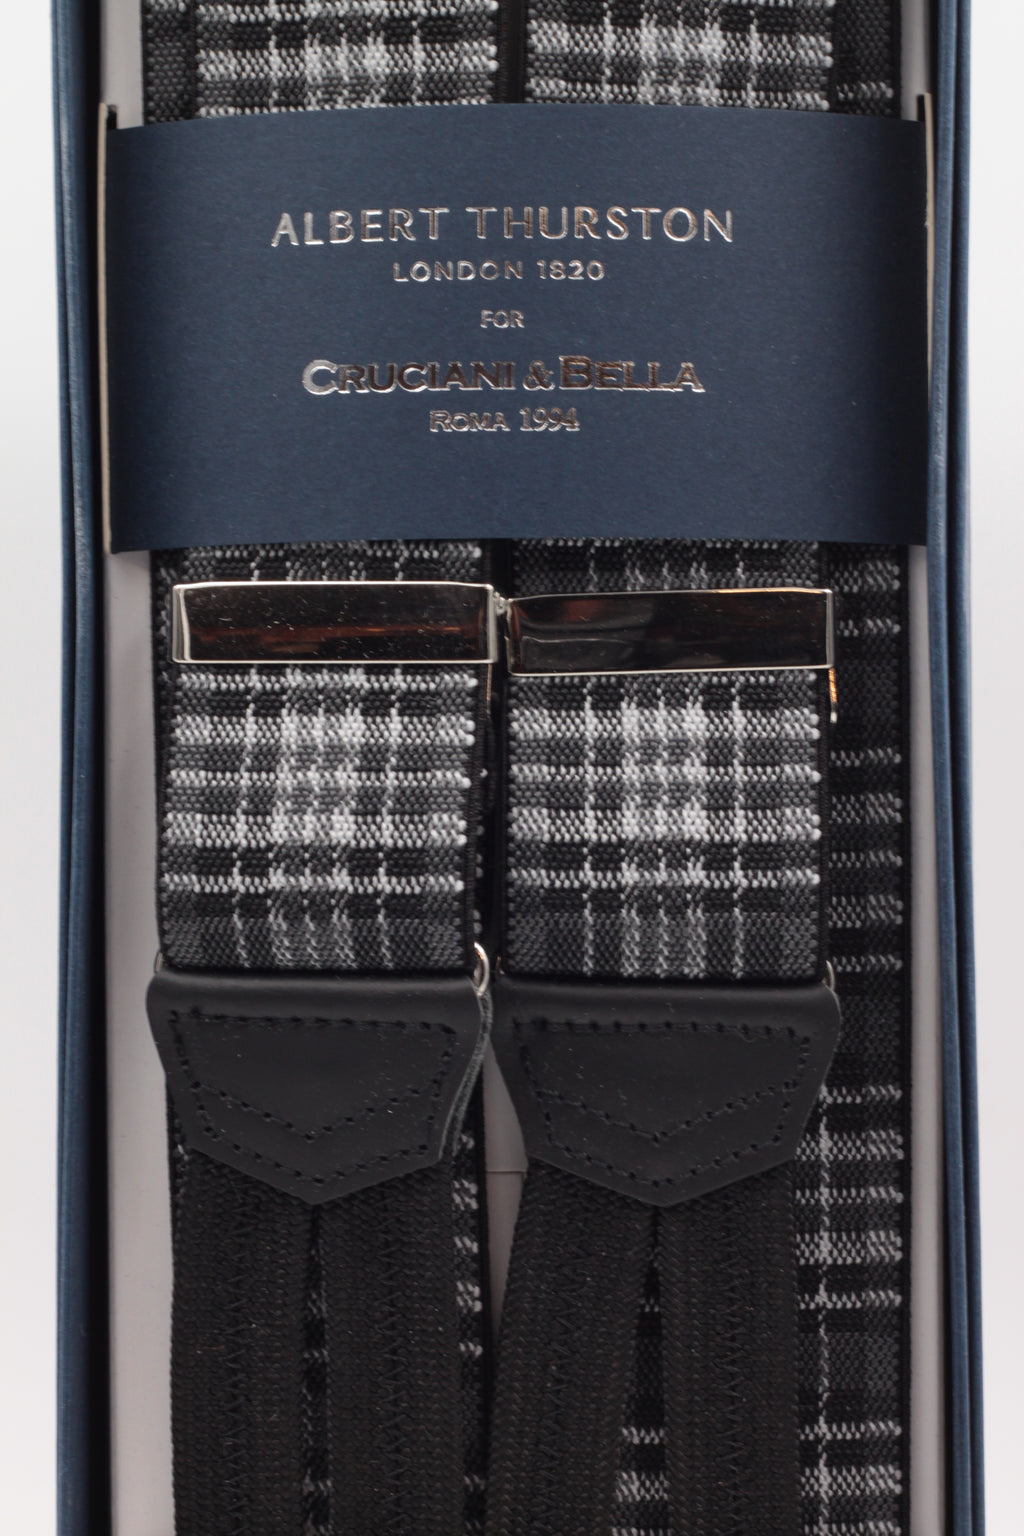 Albert Thurston for Cruciani & Bella Made in England Adjustable Sizing 35 mm elastic black and grey braces Braid ends Y-Shaped Nickel Fittings Size: L